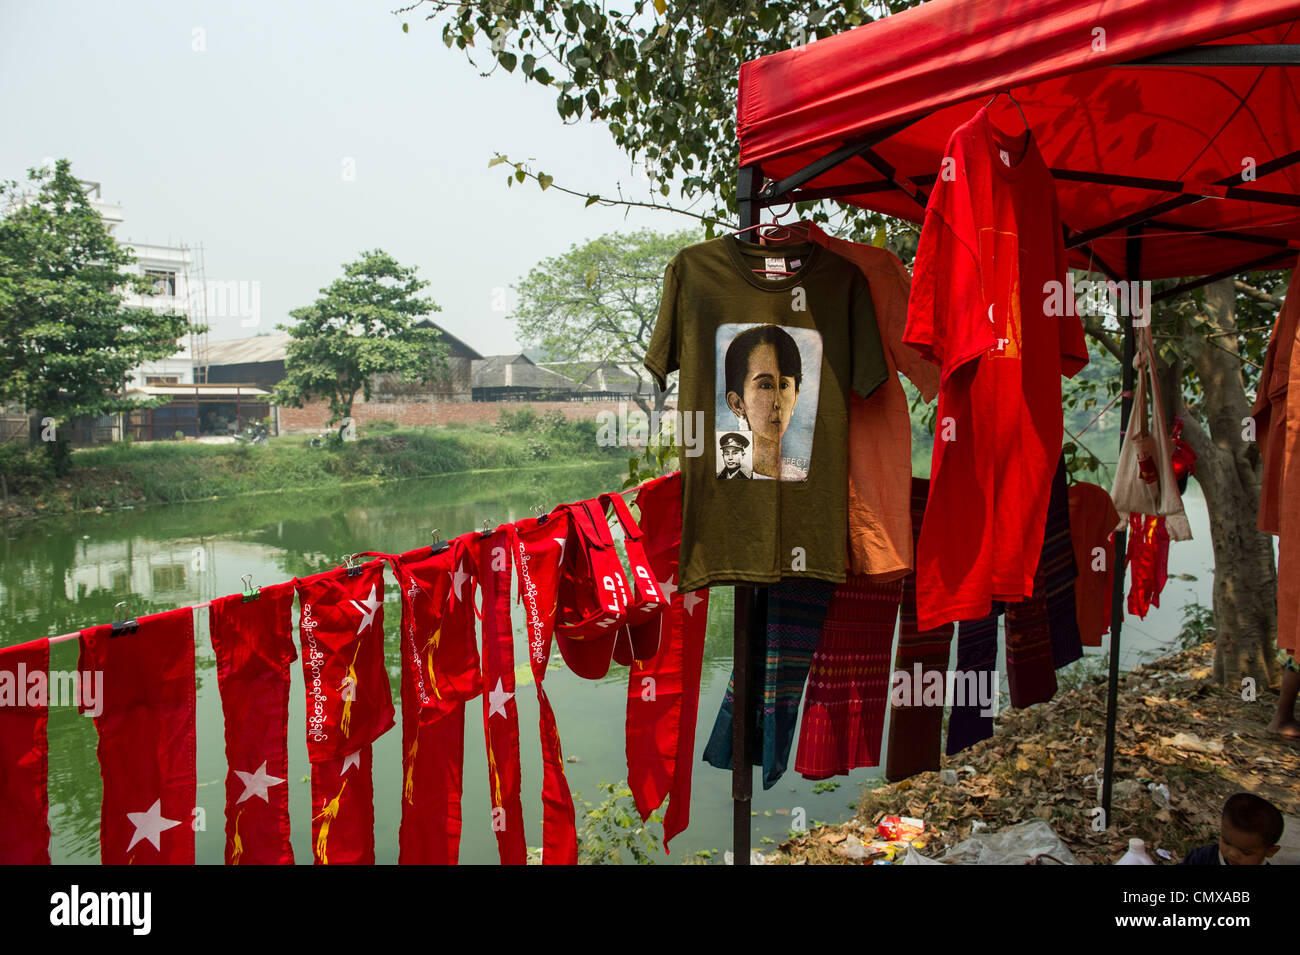 Vendor selling t-shirts and souvenirs raising money for the National League for Democracy (NLD) in Mandalay Stock Photo